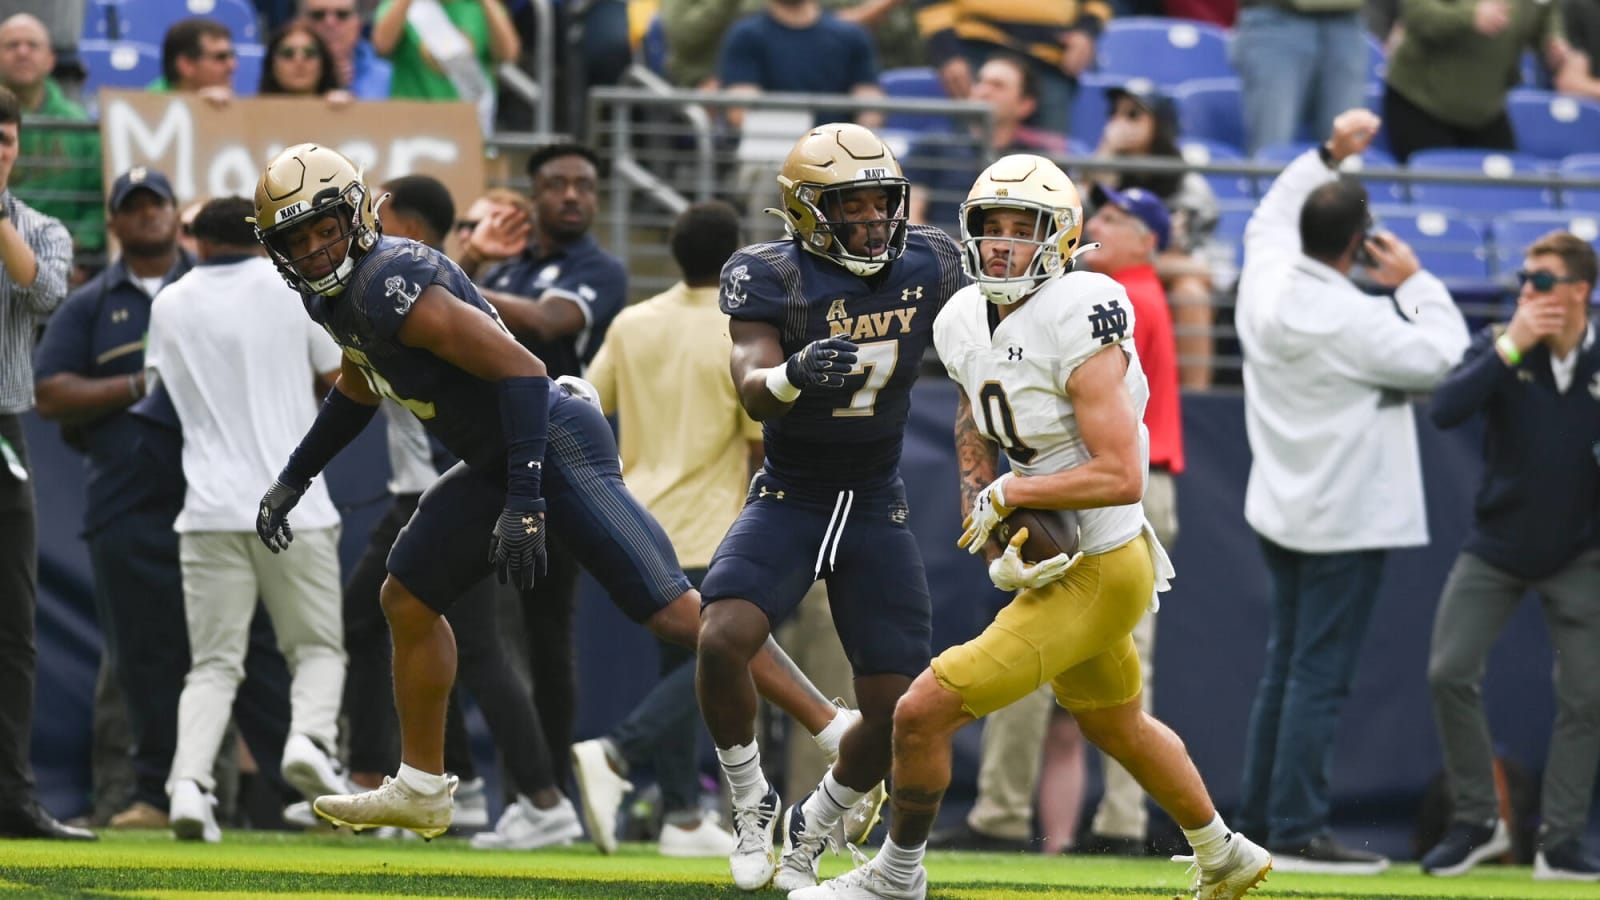 Watch: Notre Dame's Braden Lenzy makes incredible touchdown catch vs. Navy